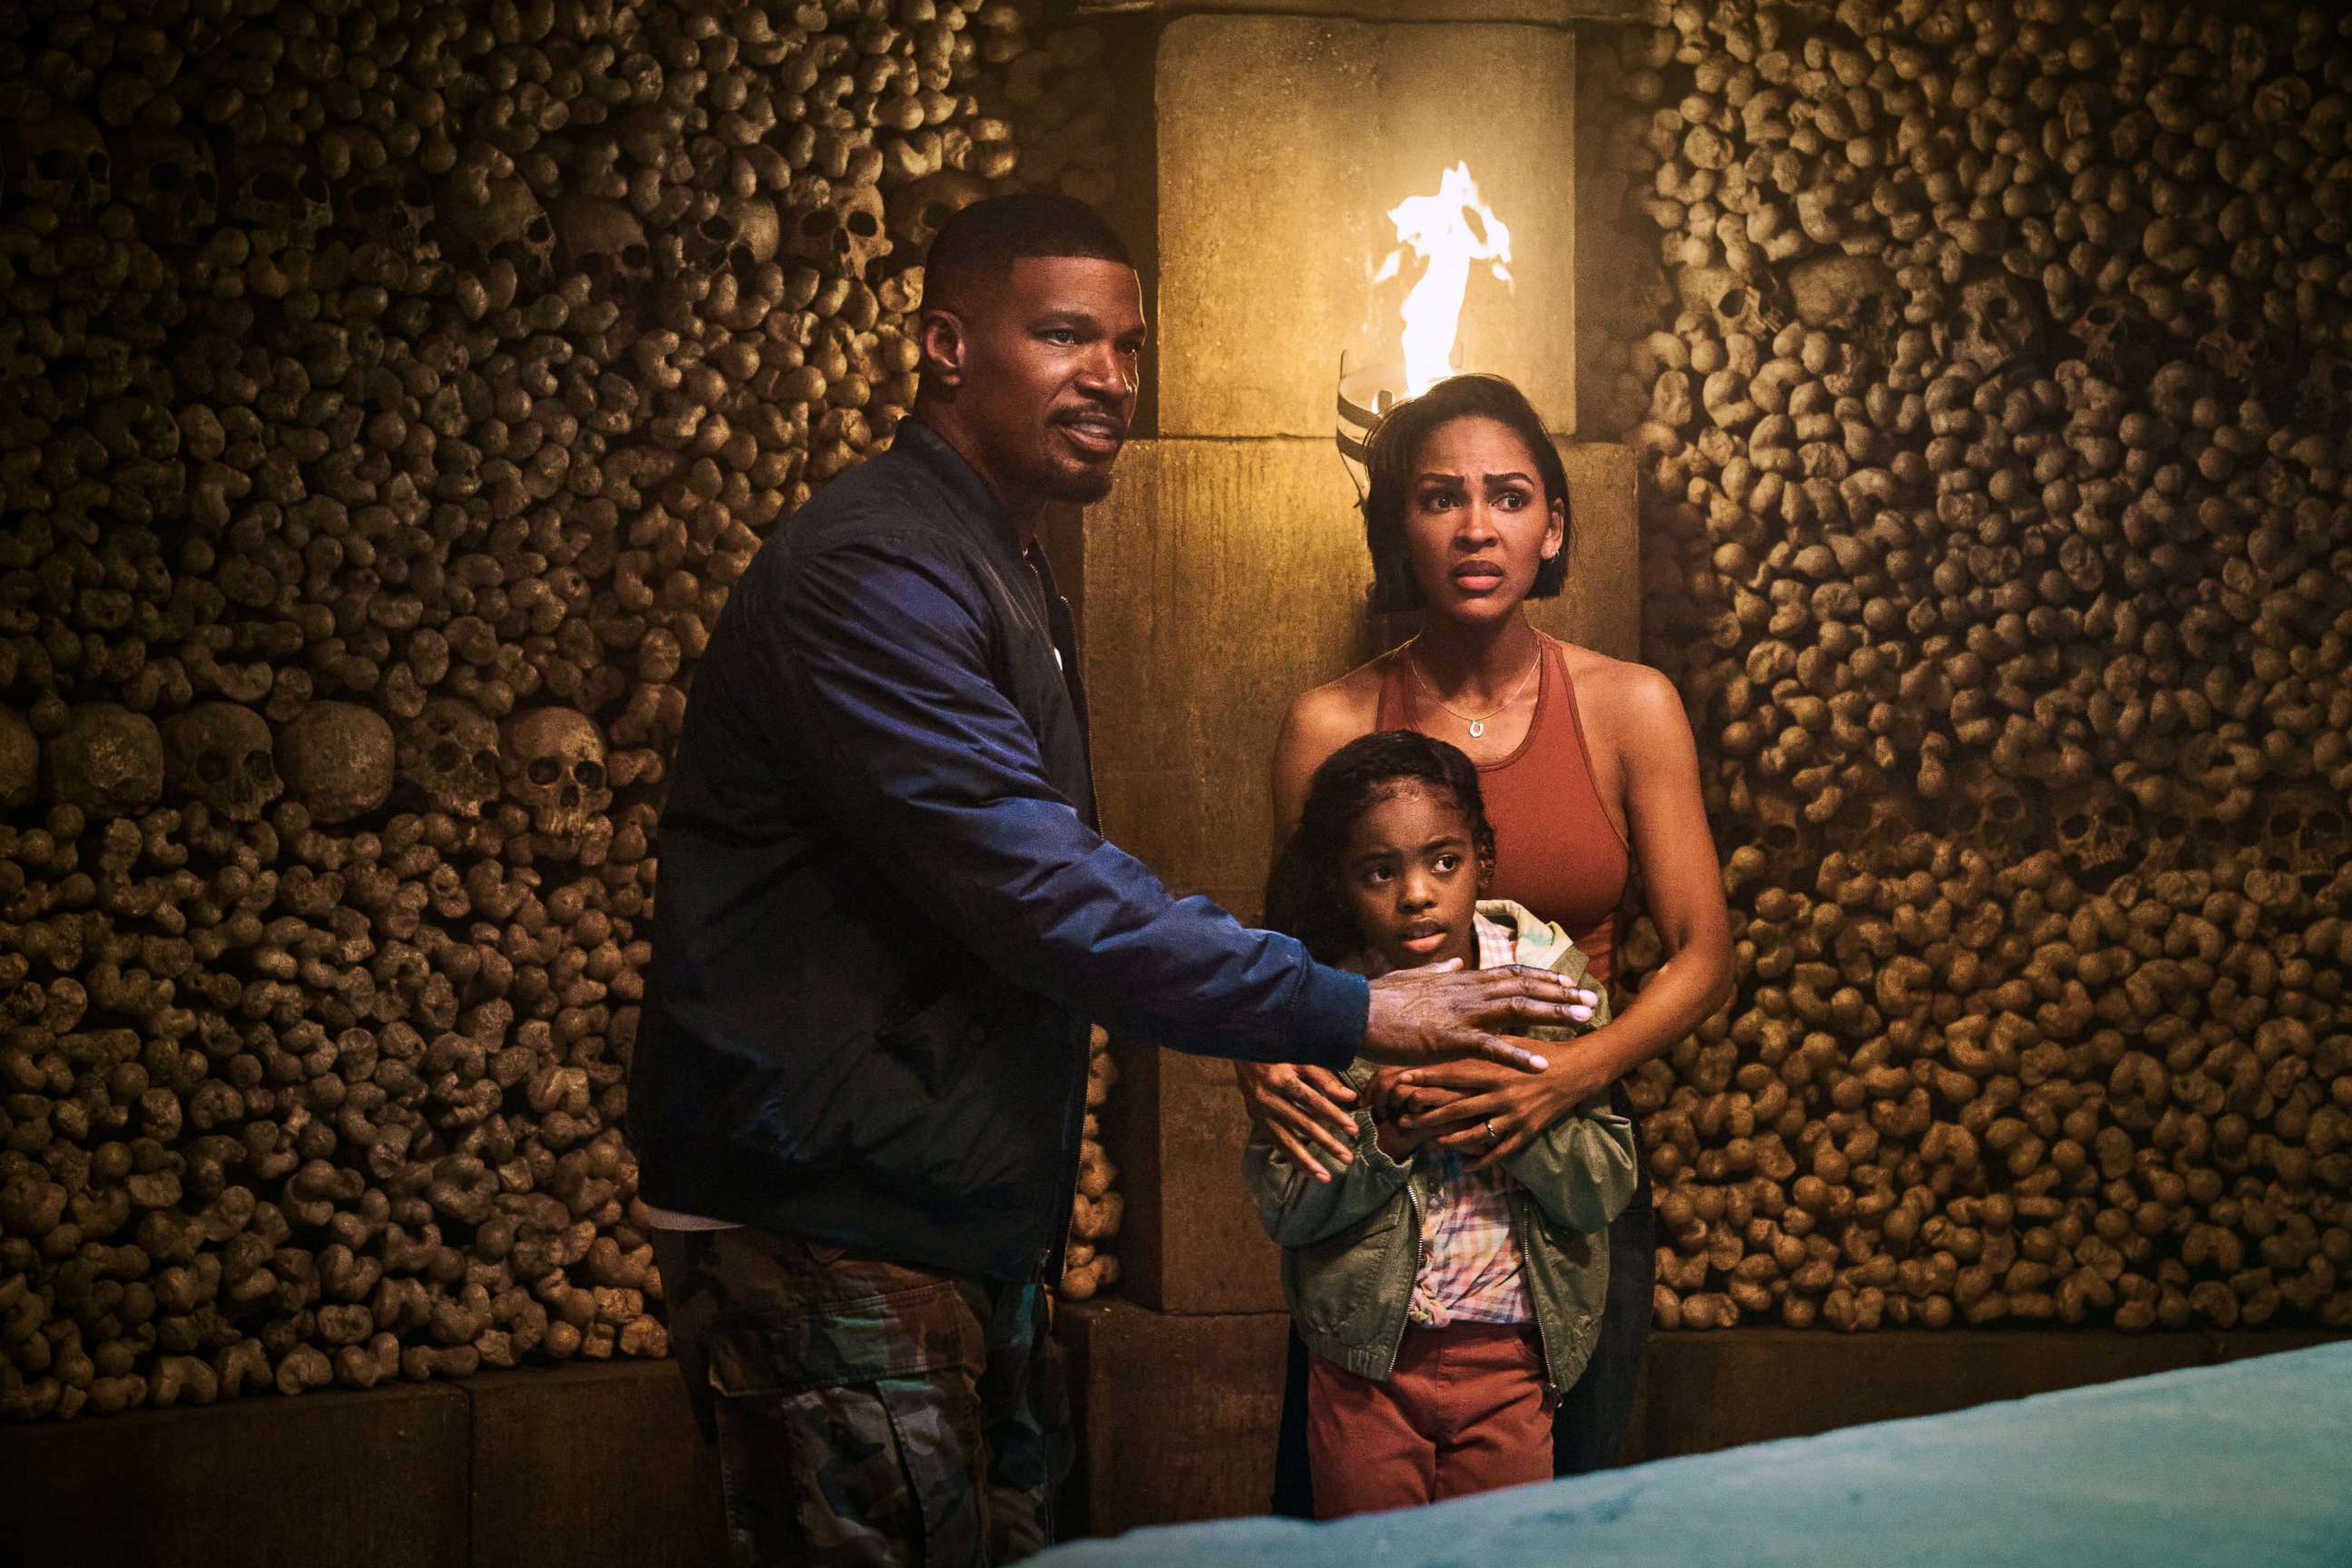 PHOTO: Jamie Foxx, as Bud, Zion Broadnax, as Paige, and Meagan Good, as Jocelyn, in Day Shift.